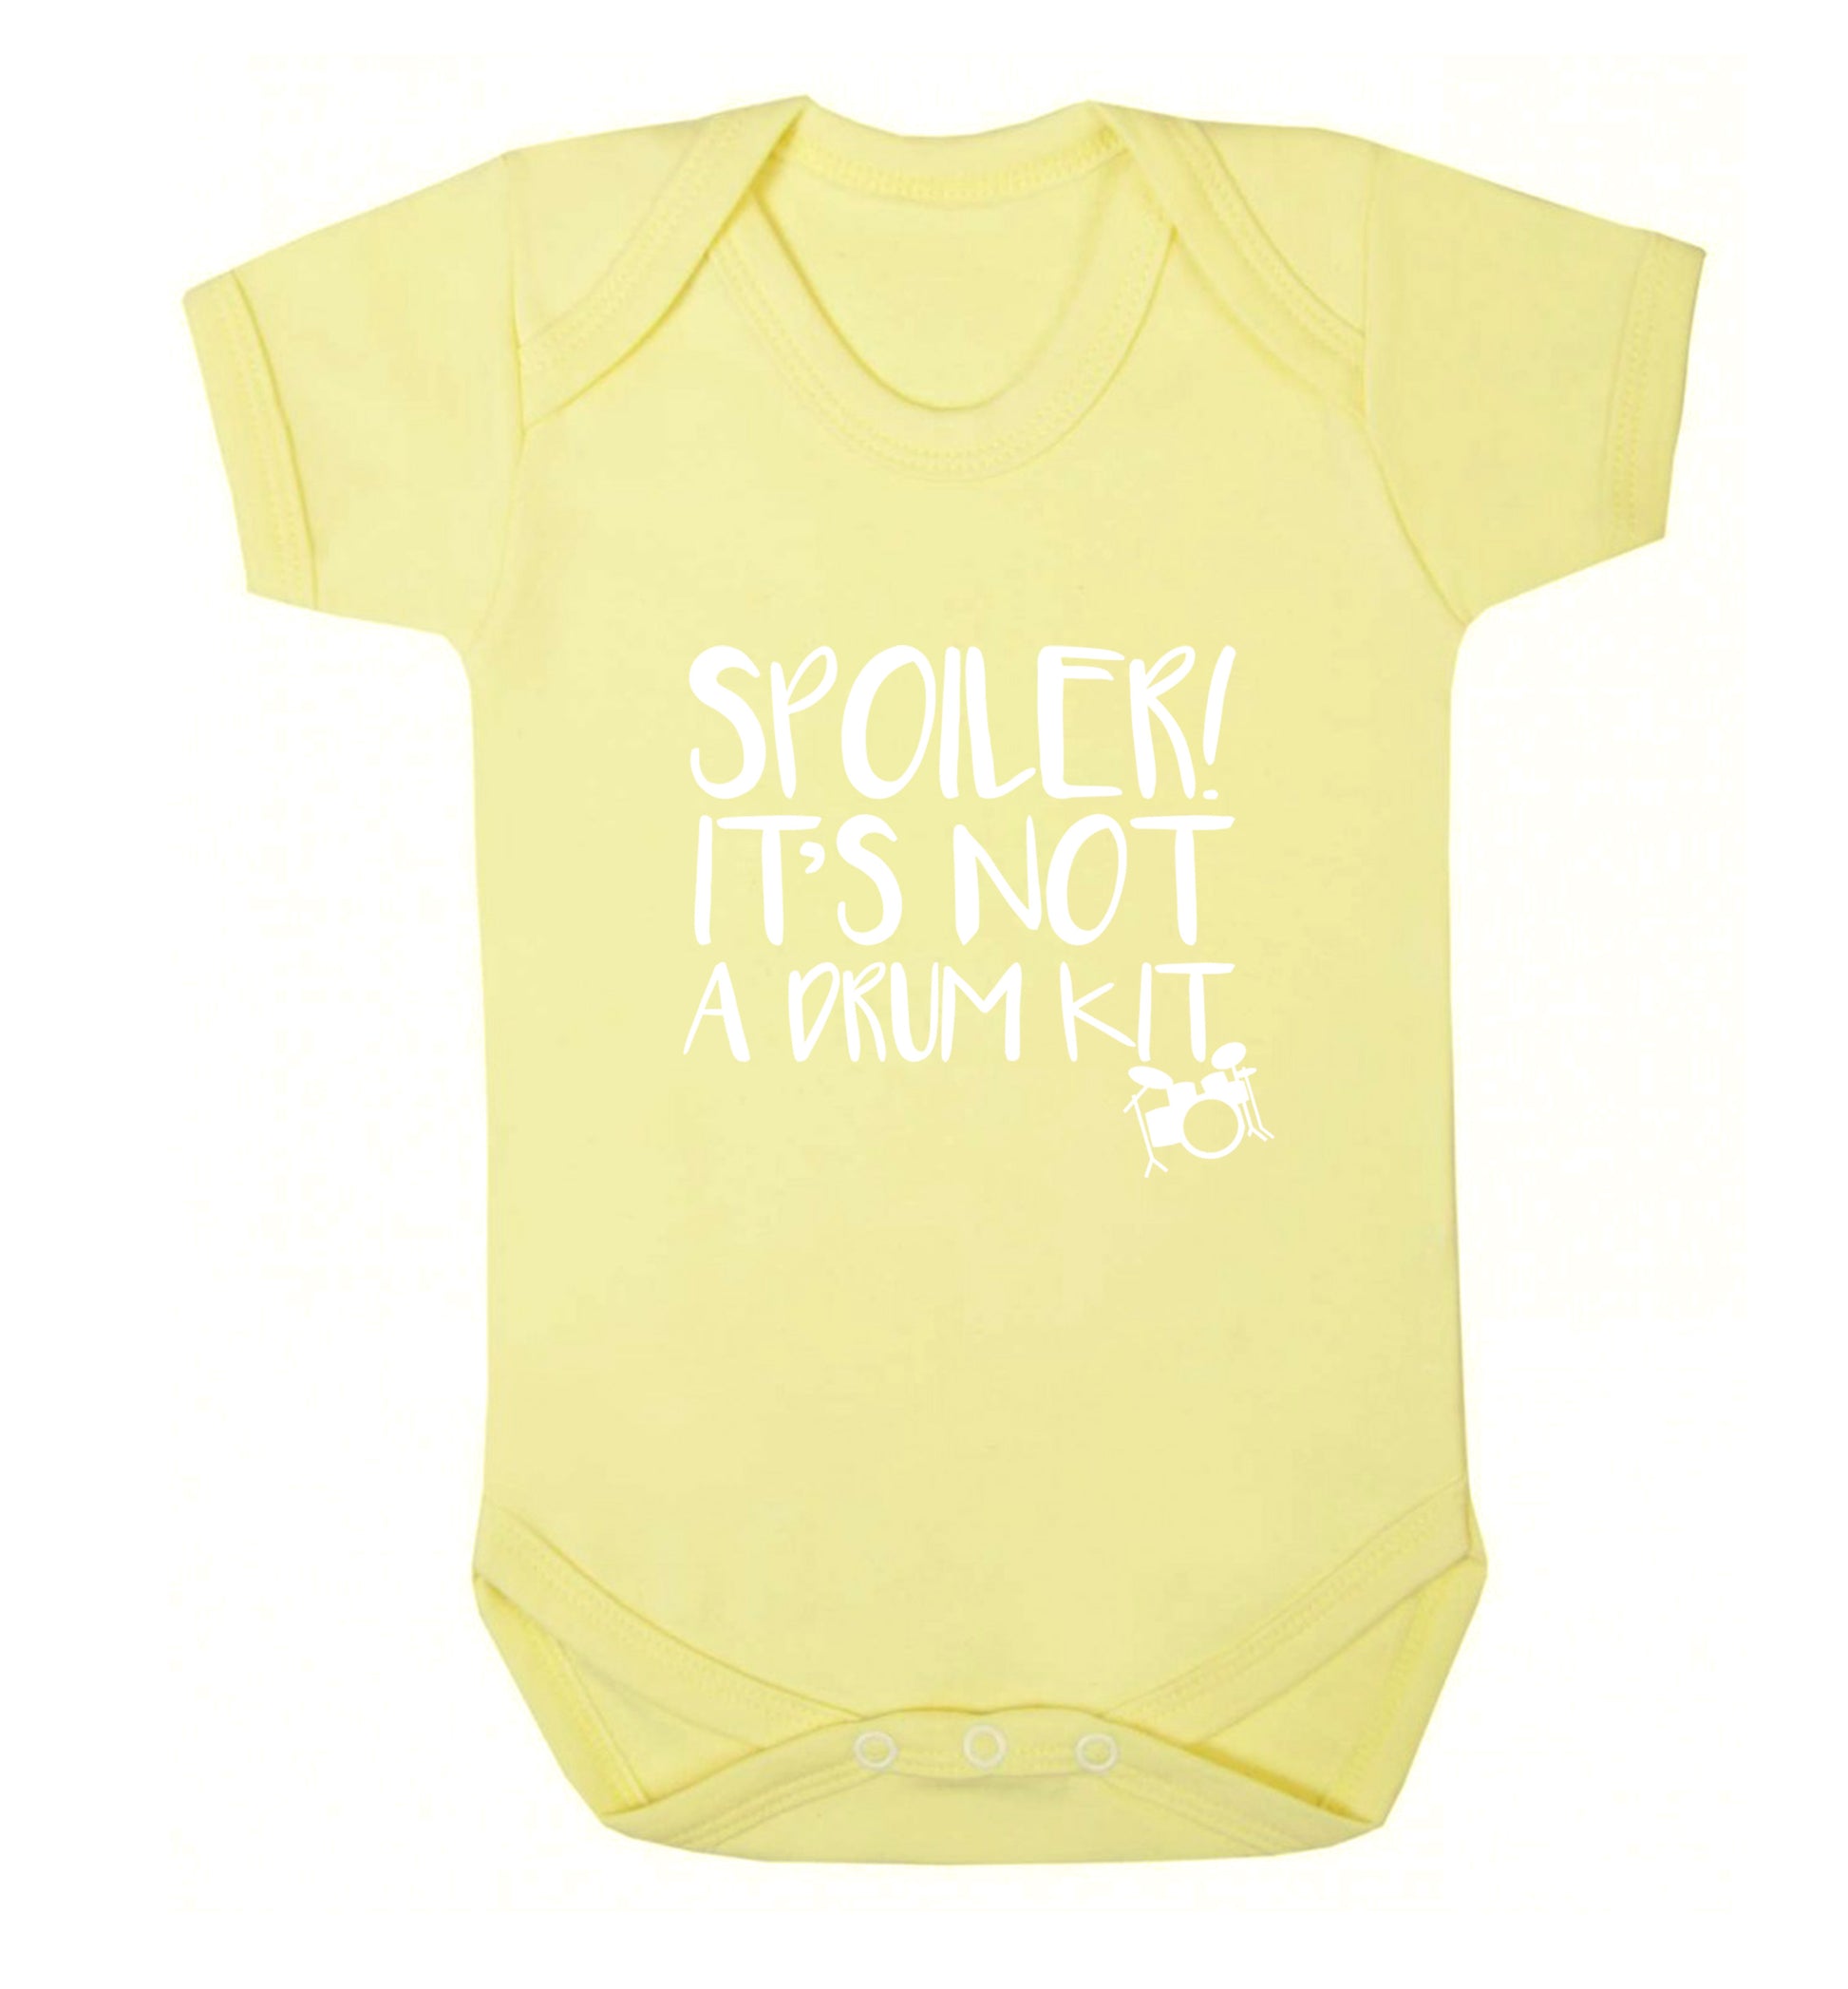 Spoiler it's not a drum kit Baby Vest pale yellow 18-24 months